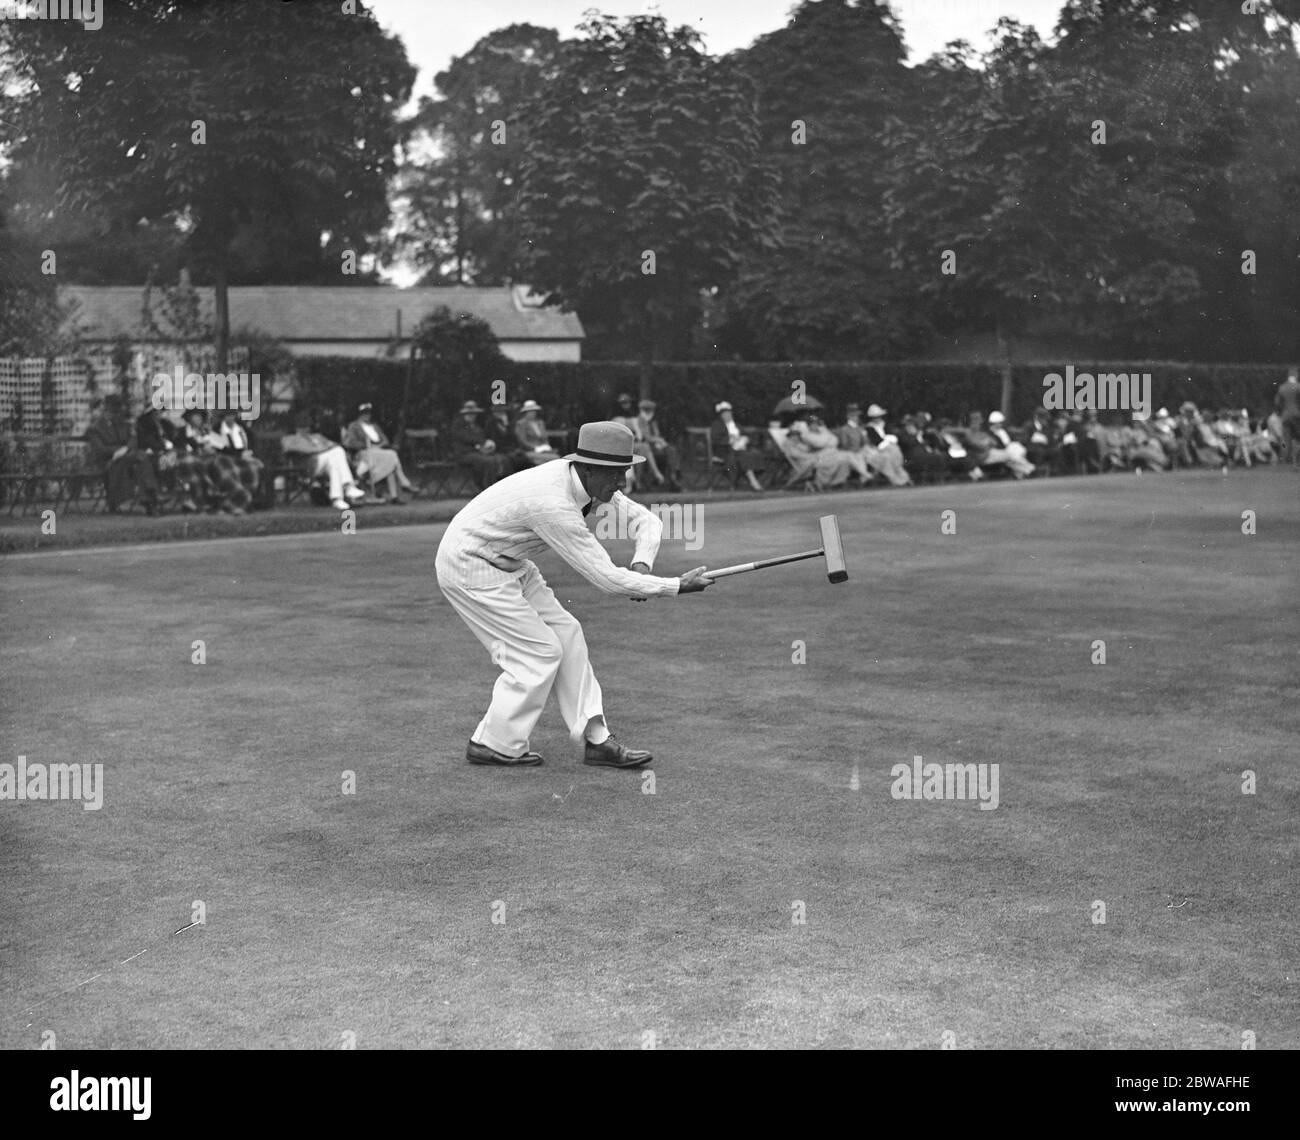 Crouquet at Roehampton , England versus Australia test match for the McRobertson Shield Cyril J Miller ( Australia ) in play 20 August 1937 Stock Photo